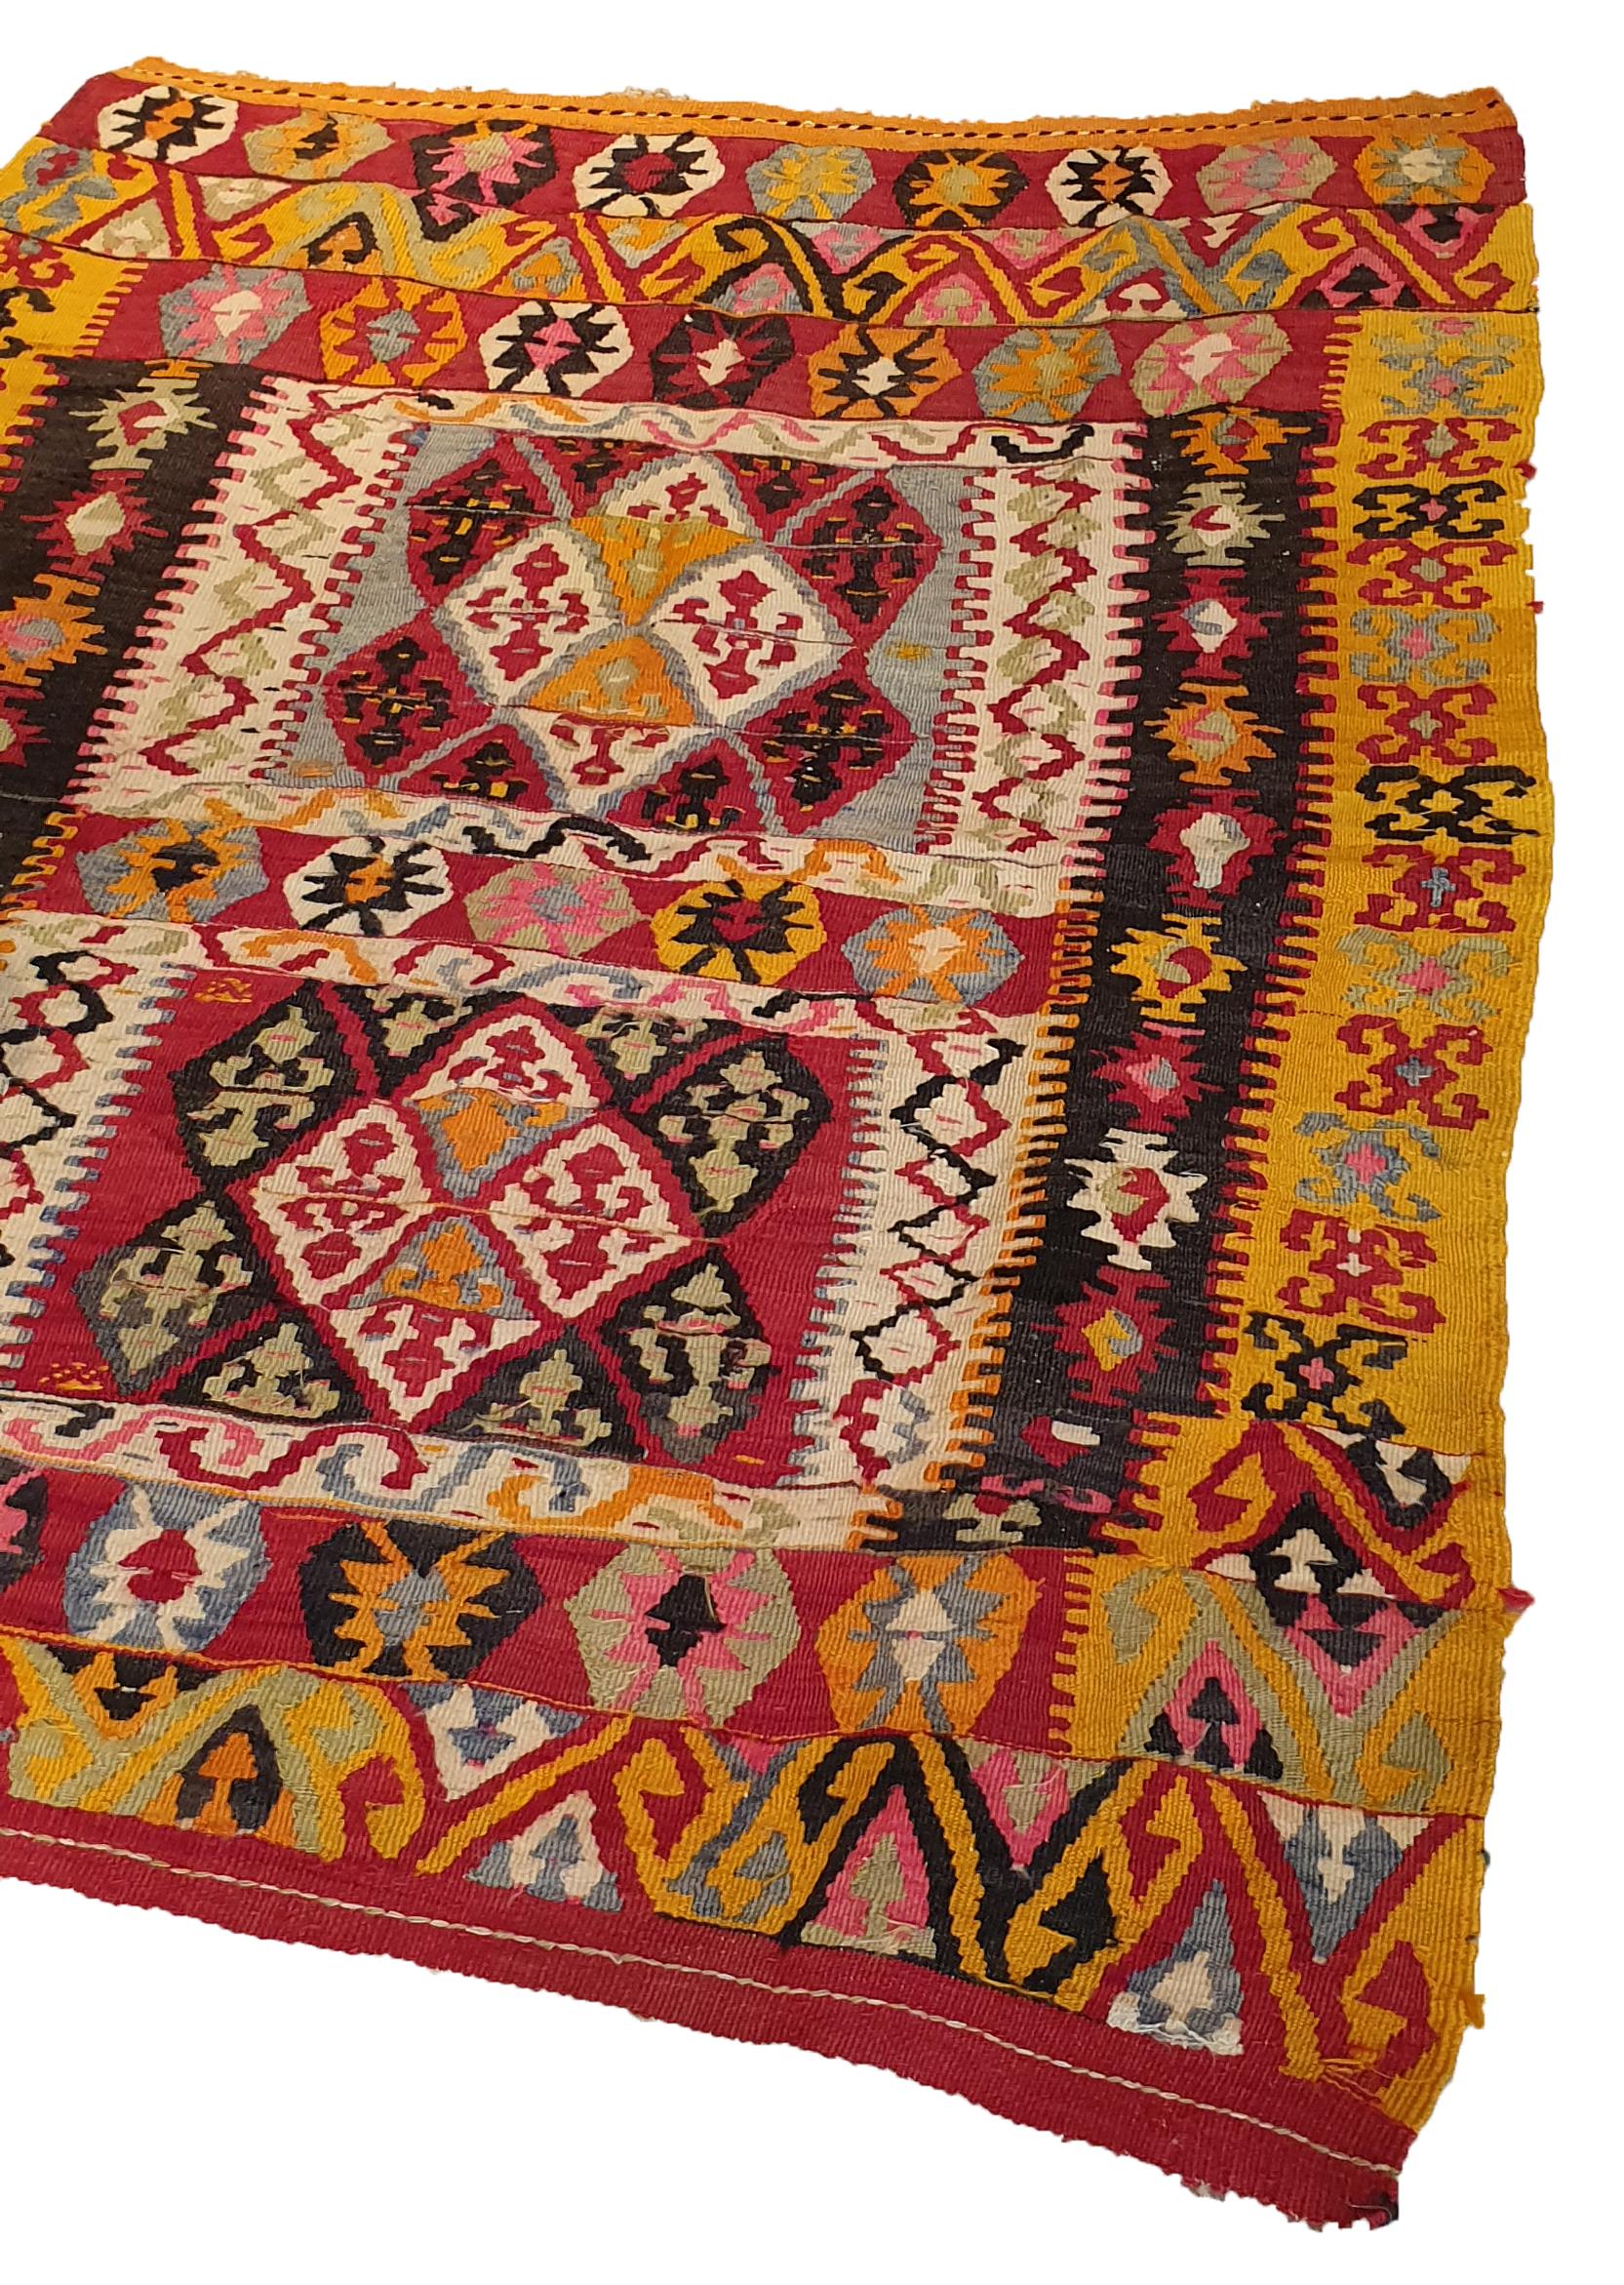 N° 698 - Kilim Sivas handmade in Turkey in 19th century
High quality, beautiful graphics and remarkable finesse.
Perfect state of preservation.

Measures: 135 x 110 cm.
     